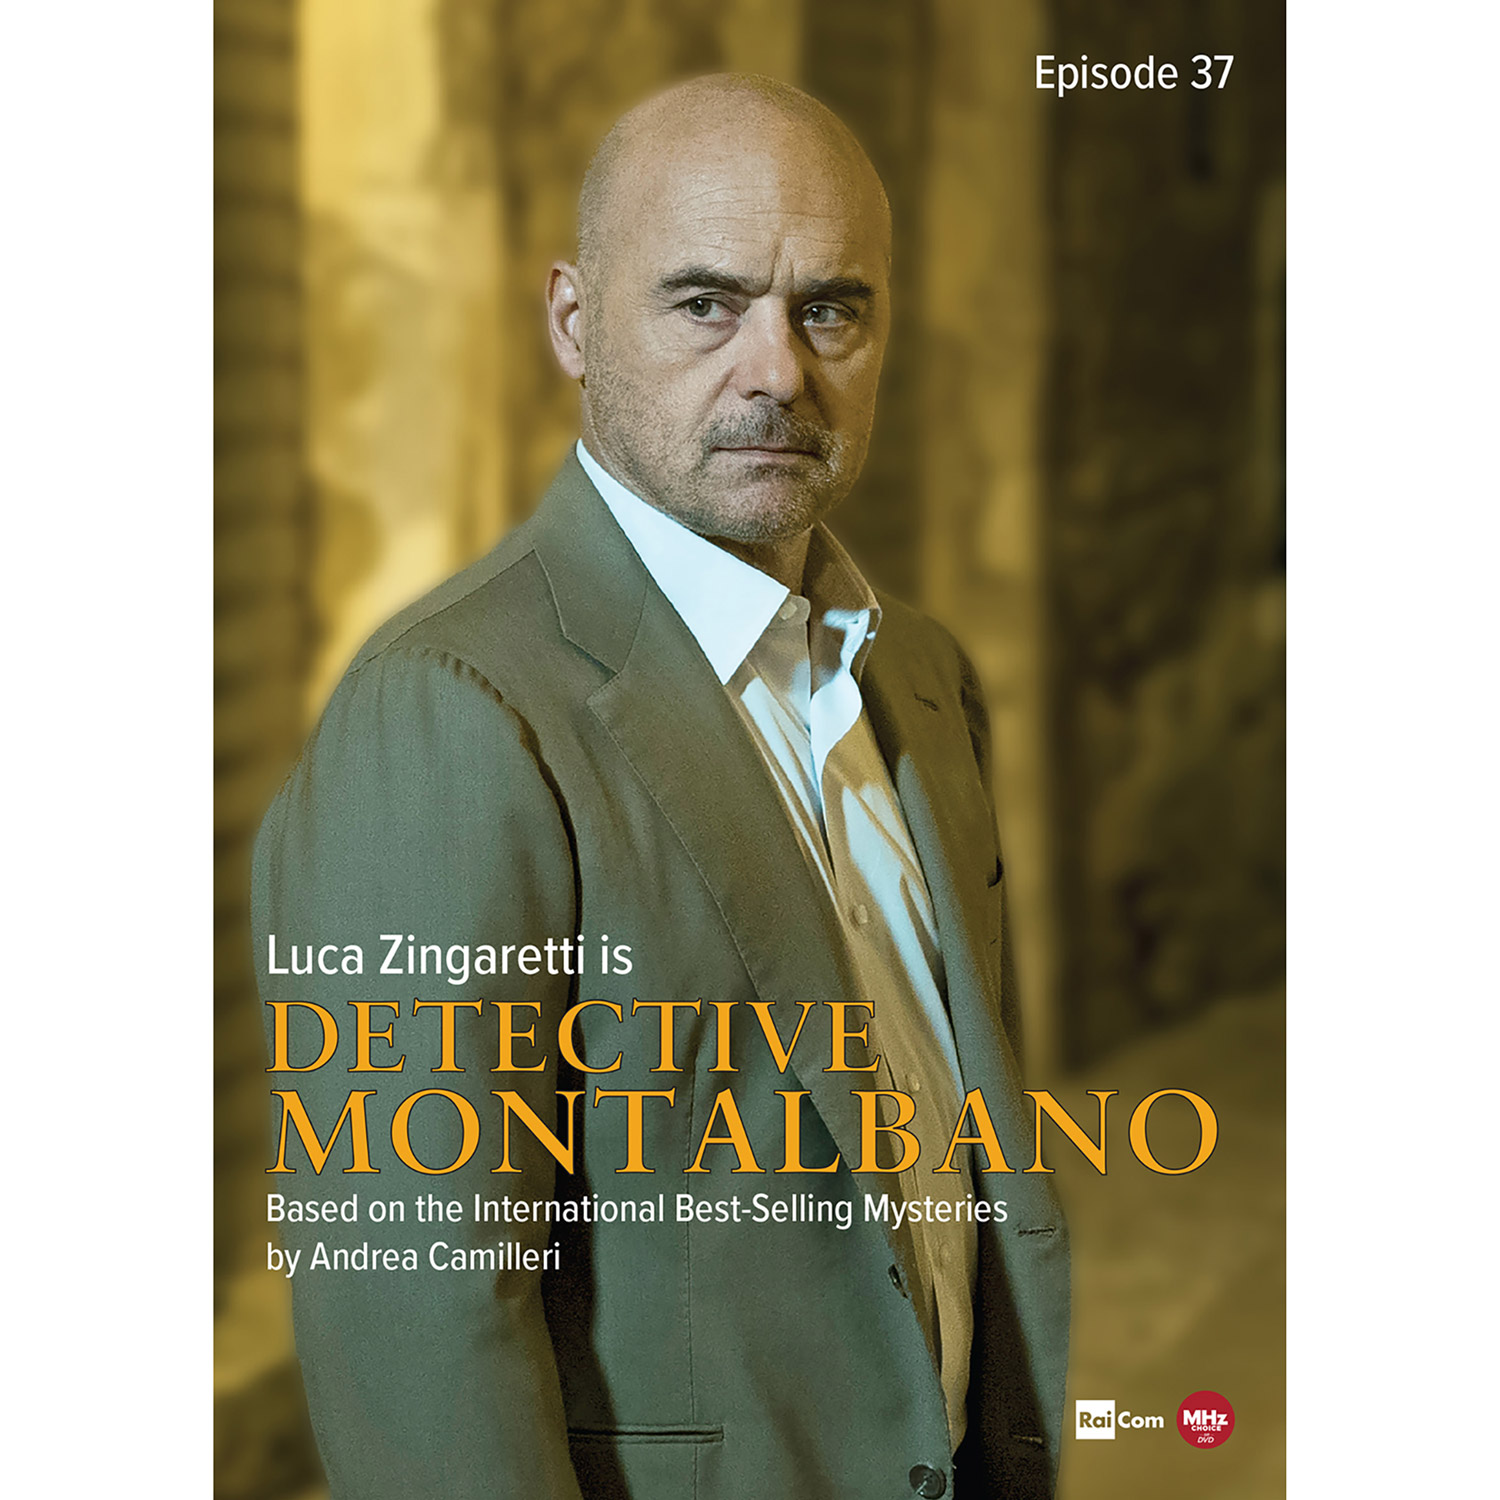 Product image for Detective Montalbano: Episode 37 DVD